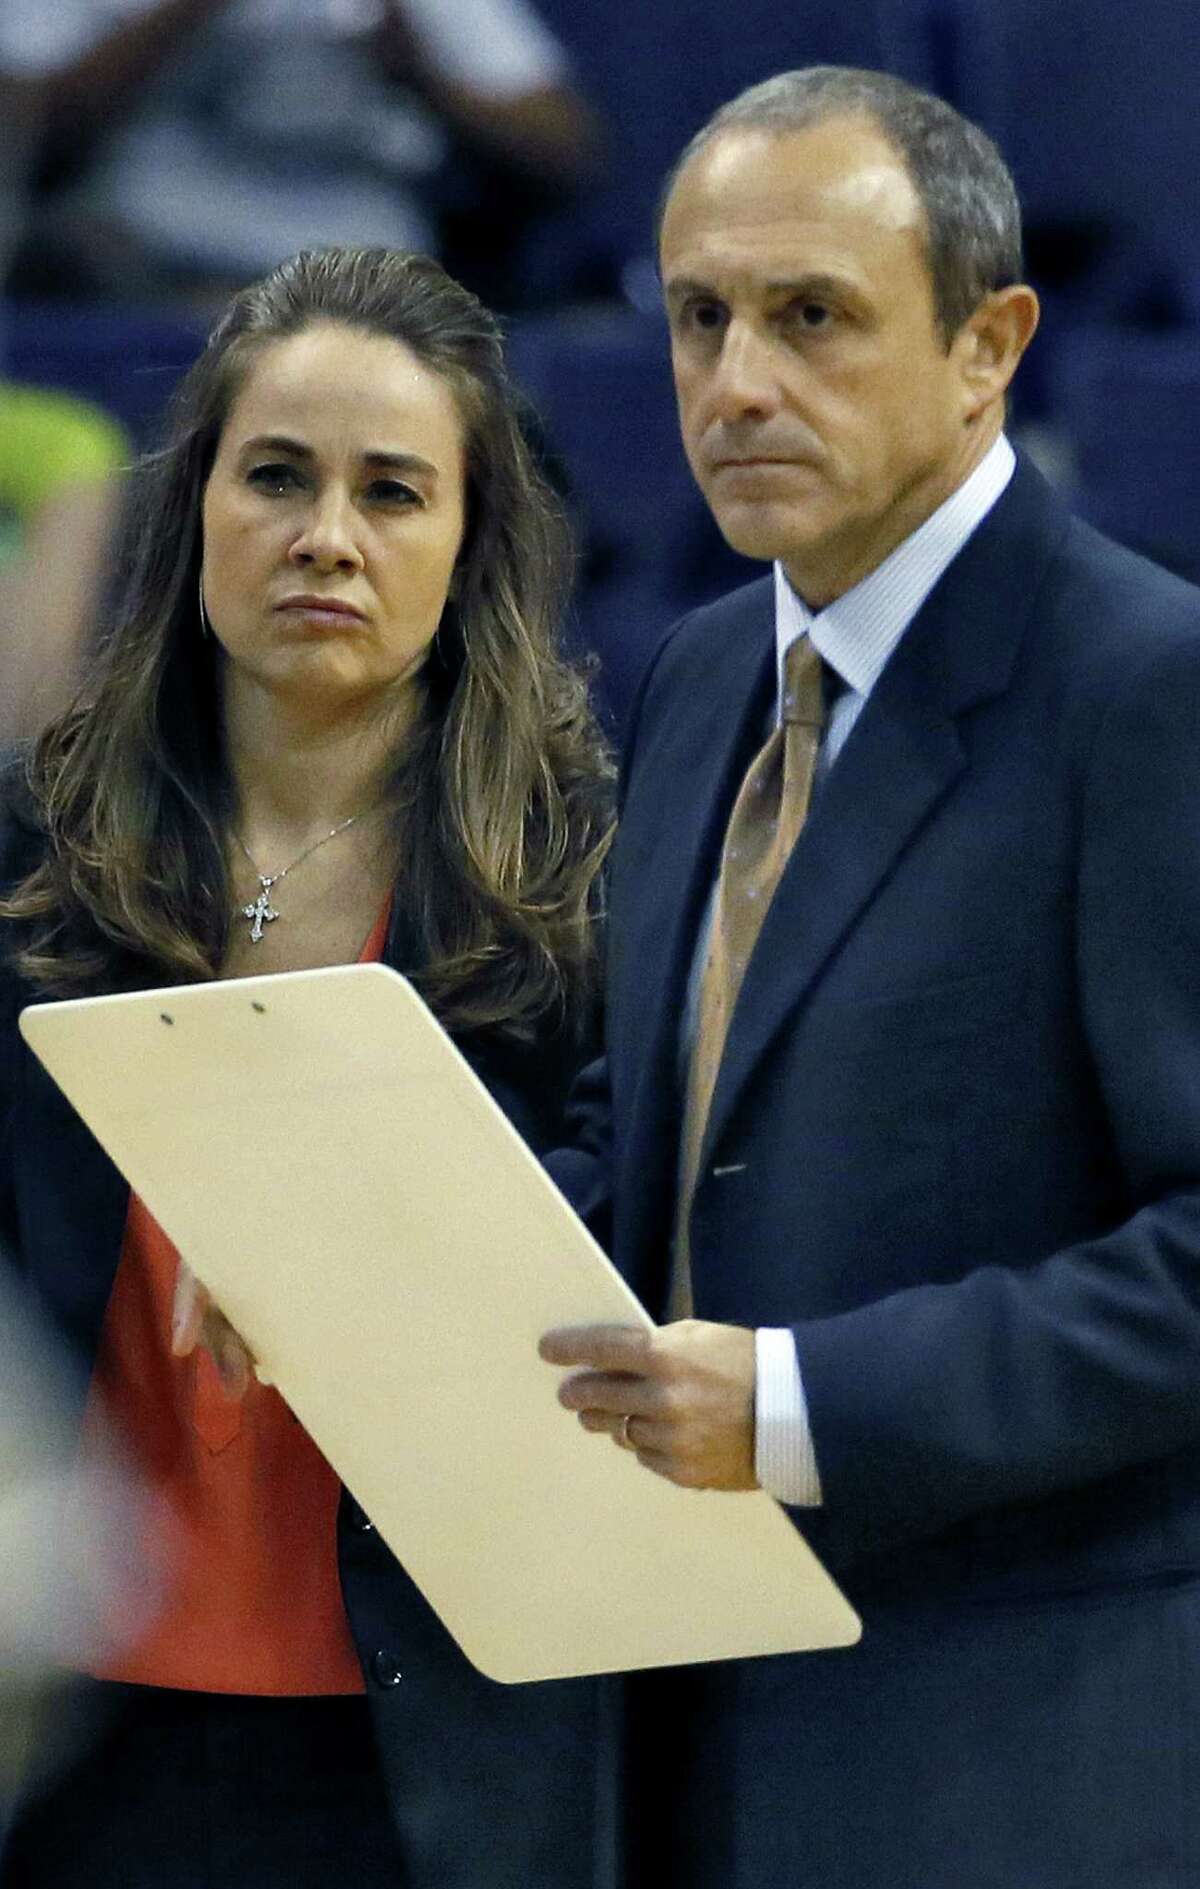 Assistant coaches The Spurs beefed-up their coaching lineup over the summer when they added former WNBA star Becky Hammon and European coaching legend Ettore Messina. The Spurs' hire of WNBA star Becky Hammon as the NBA's first full-time female assistant next season is one example of how they have set trends more often than following them.